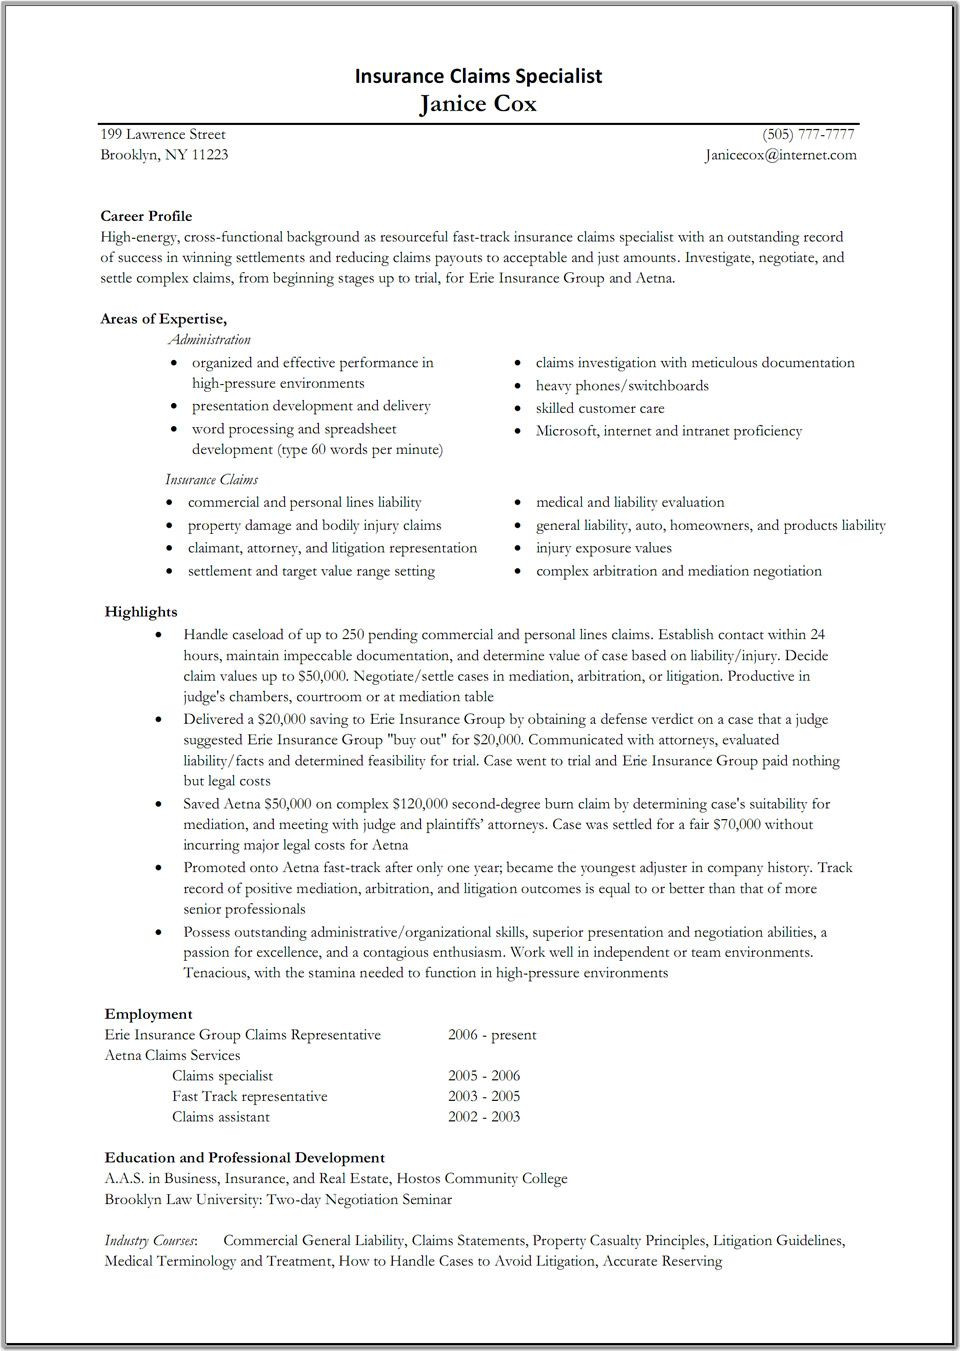 Resume Templates for Insurance Claims Adjuster isurance Claims Specialist Resume Sample Resumesdesign Resume …